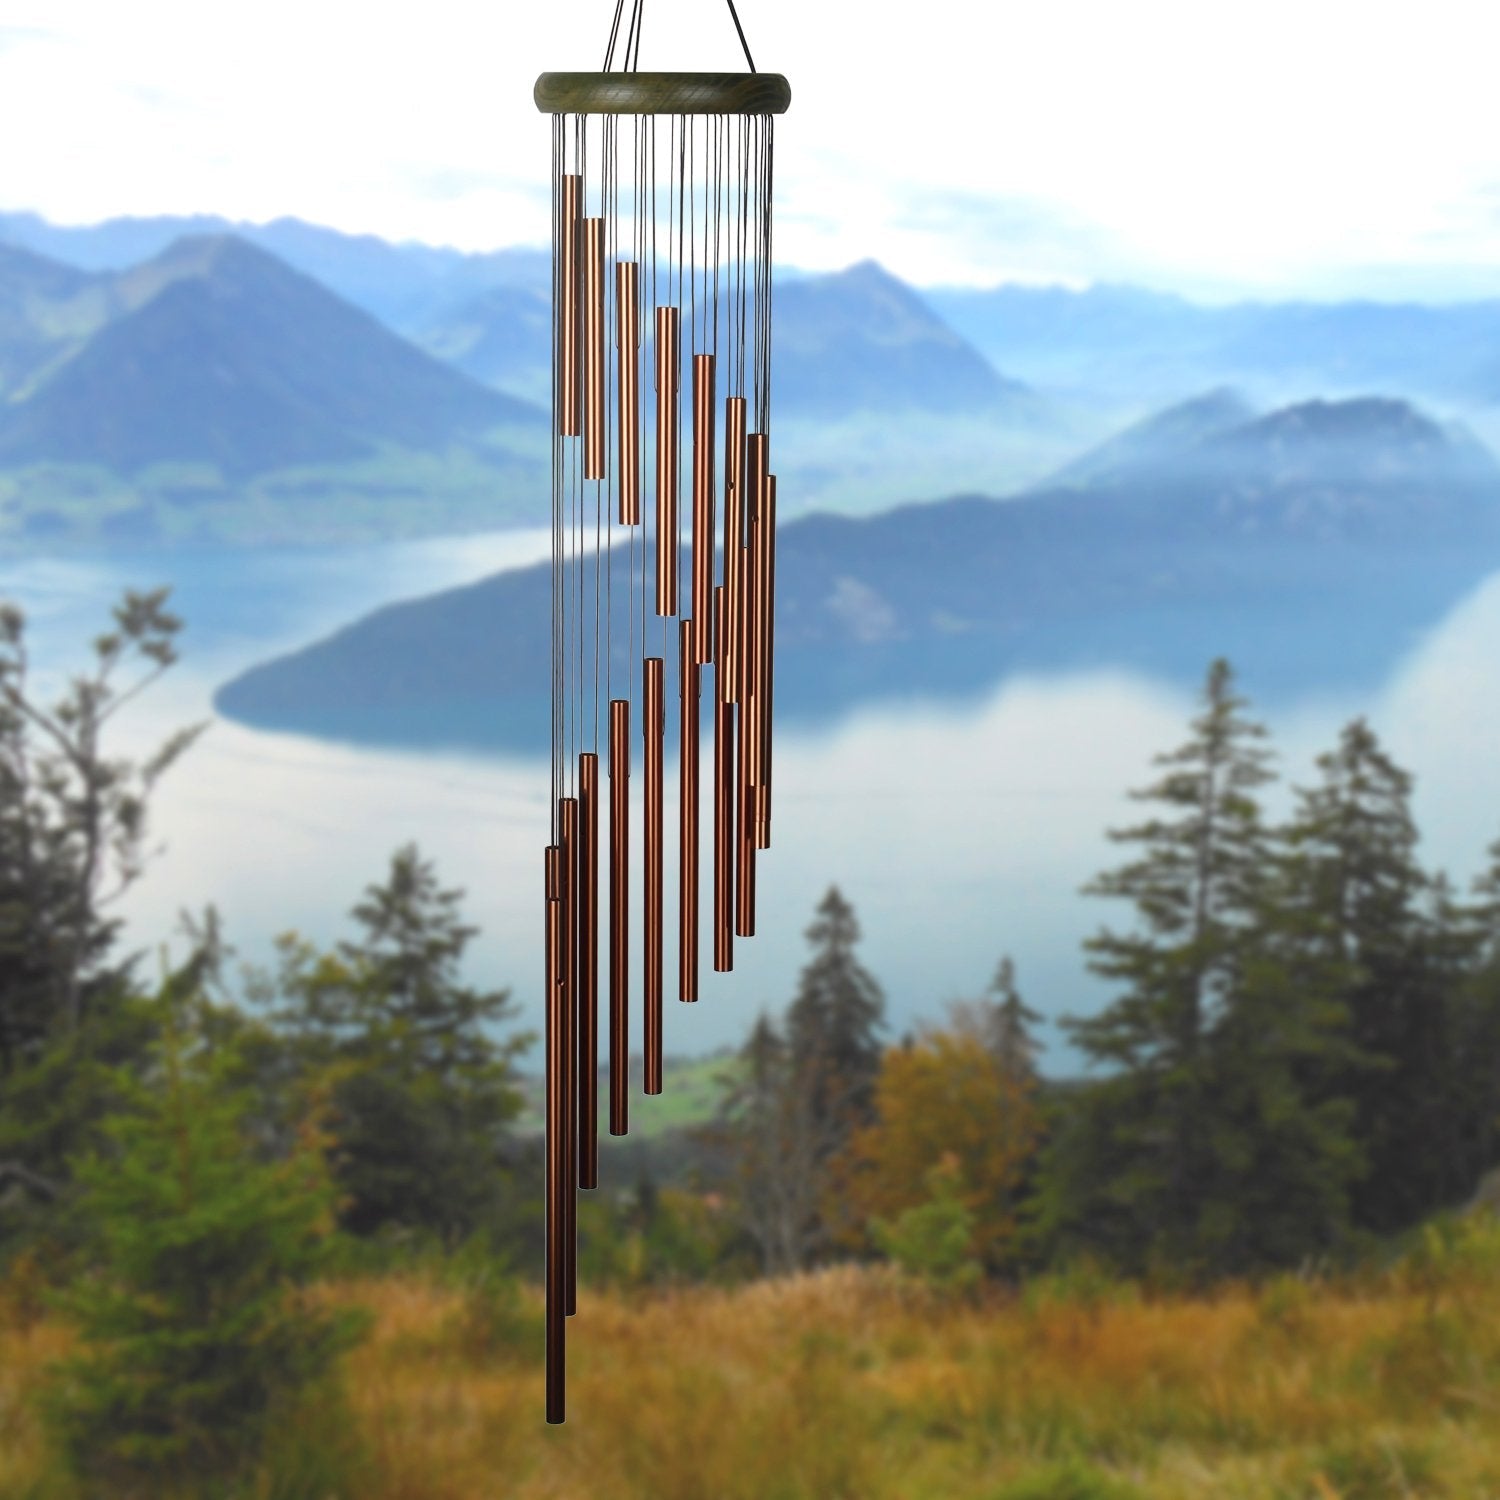 chime with misty mountains in bakcground.